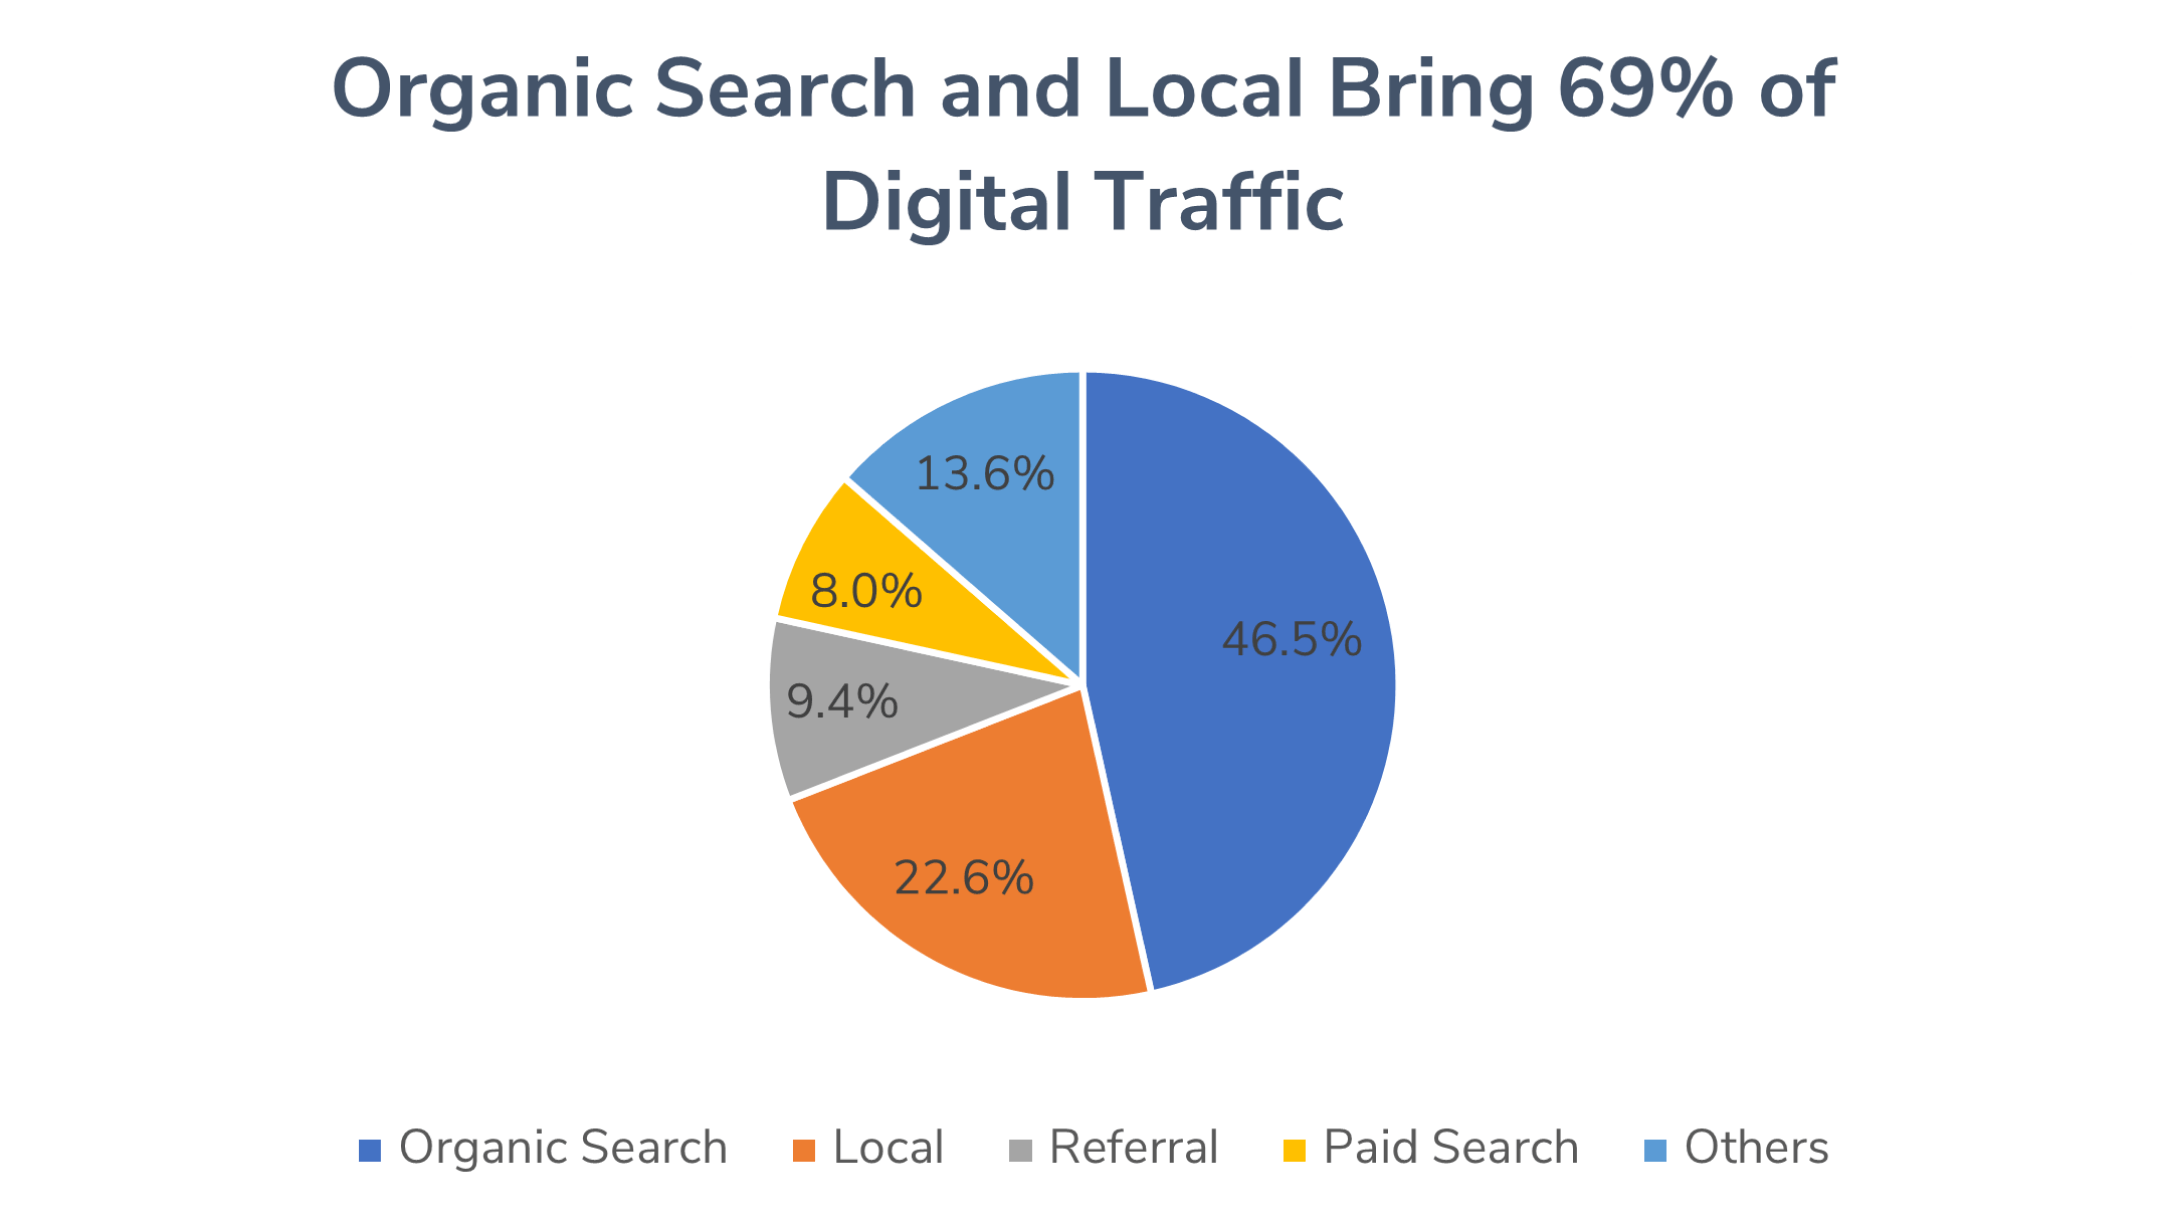 Graph that shows the percentages how users go to a website. Organic Search: 46.5%, Local: 22.6%, Referral: 9.4%, Paid Search 8.0% and Others 13.6%.